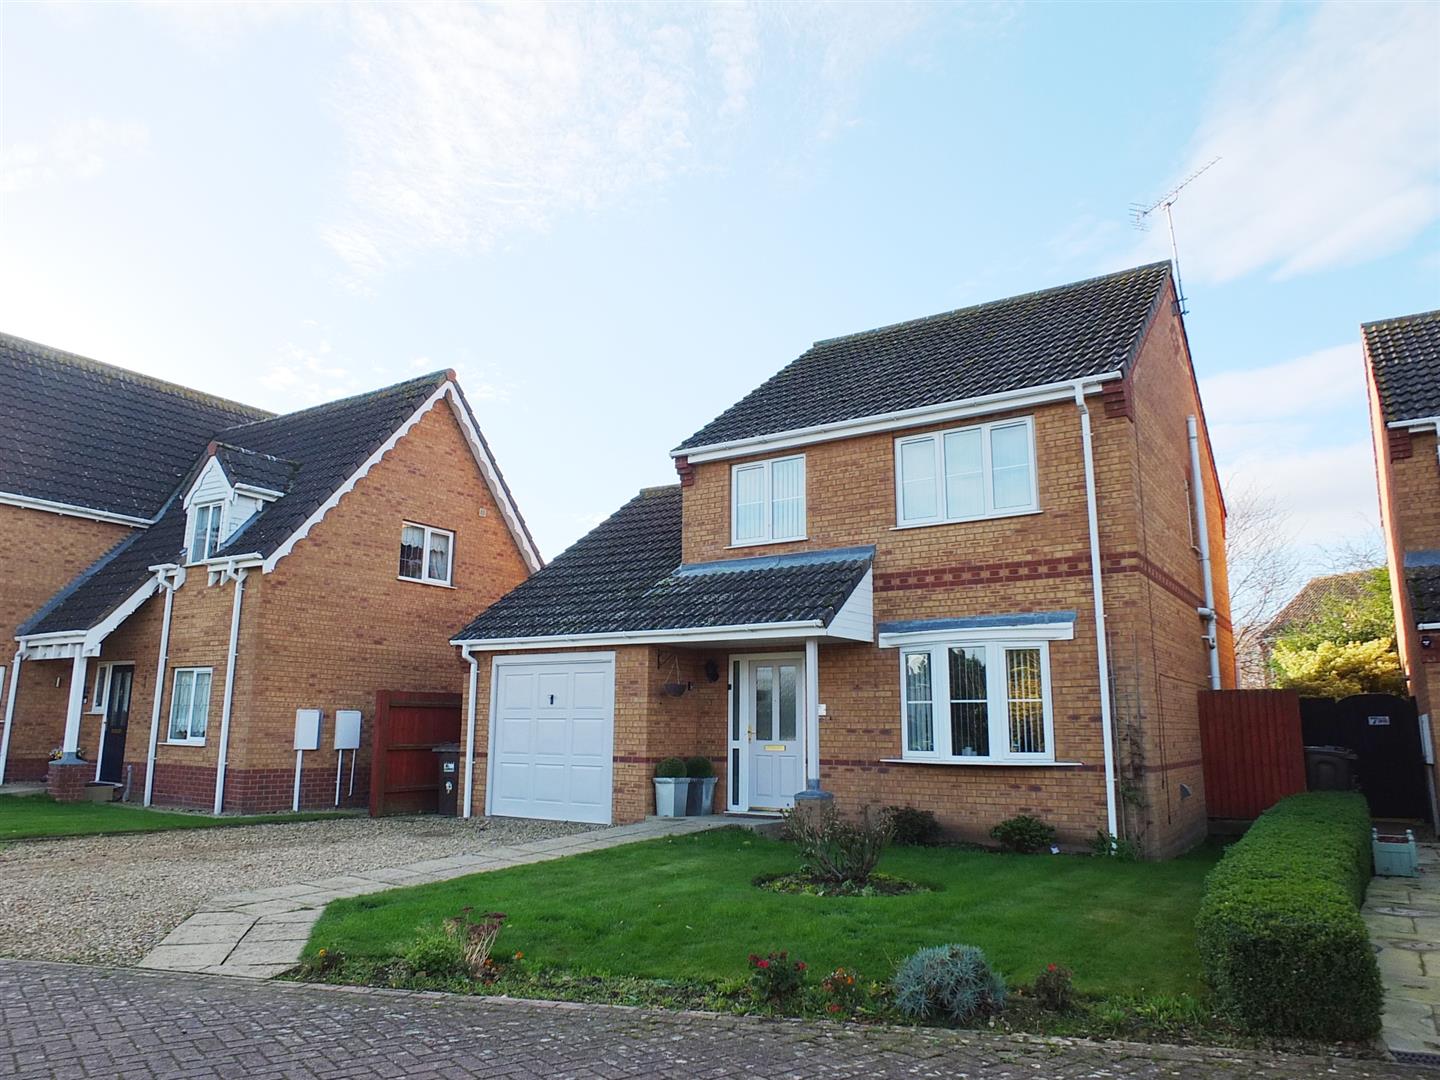 3 bed detached house for sale in John Swains Way, Long Sutton Spalding, PE12